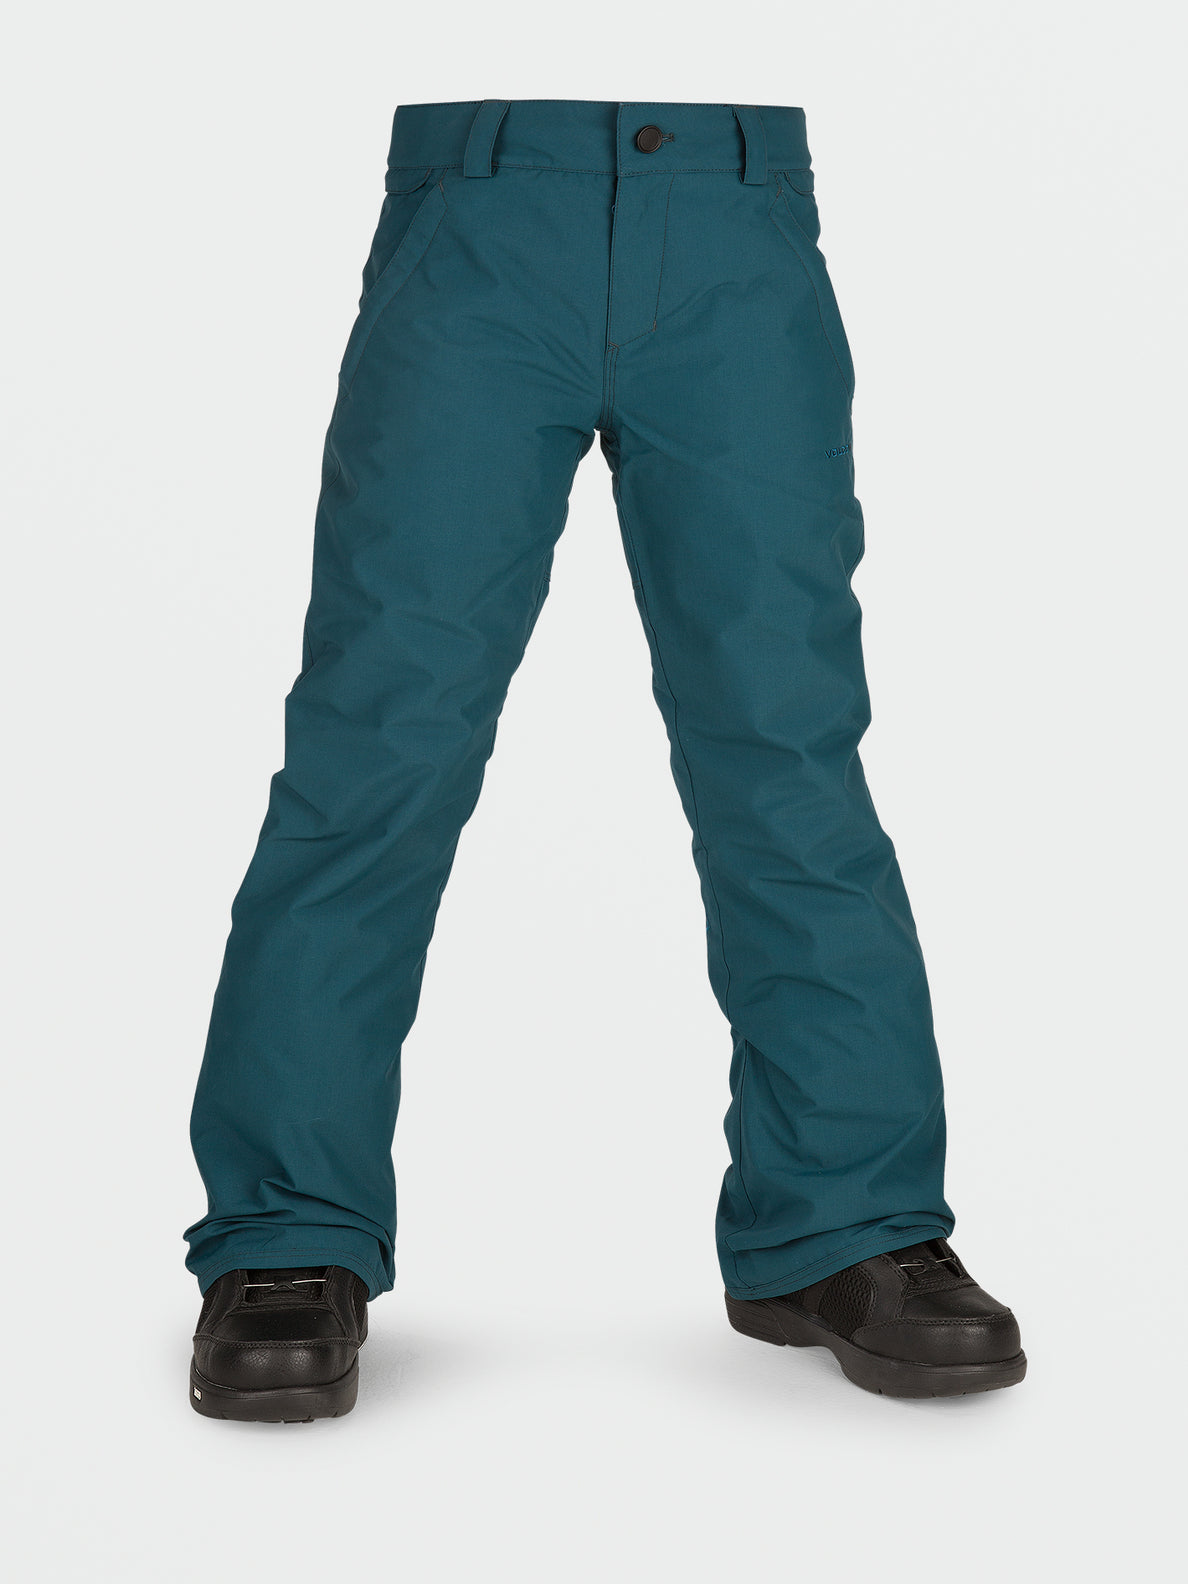 Kid's Freakin Chino Youth Insulated Pant